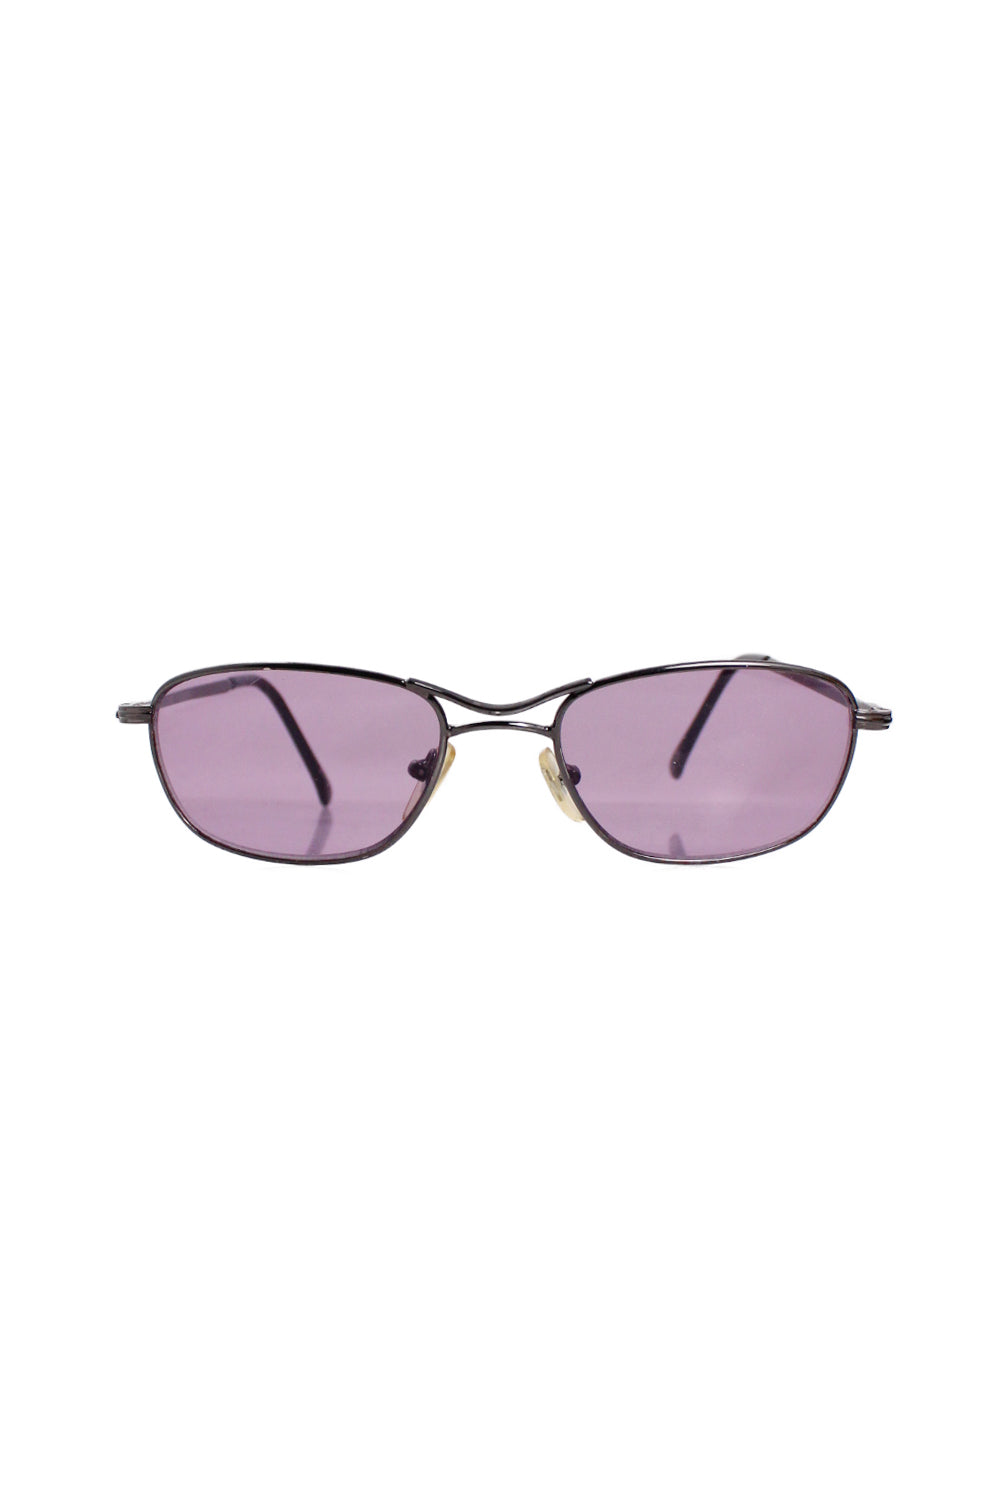 front view of enzo angiolini metallic black sunglasses. features light purples lenses, and ‘eno angiolini’ logo printed at arms.